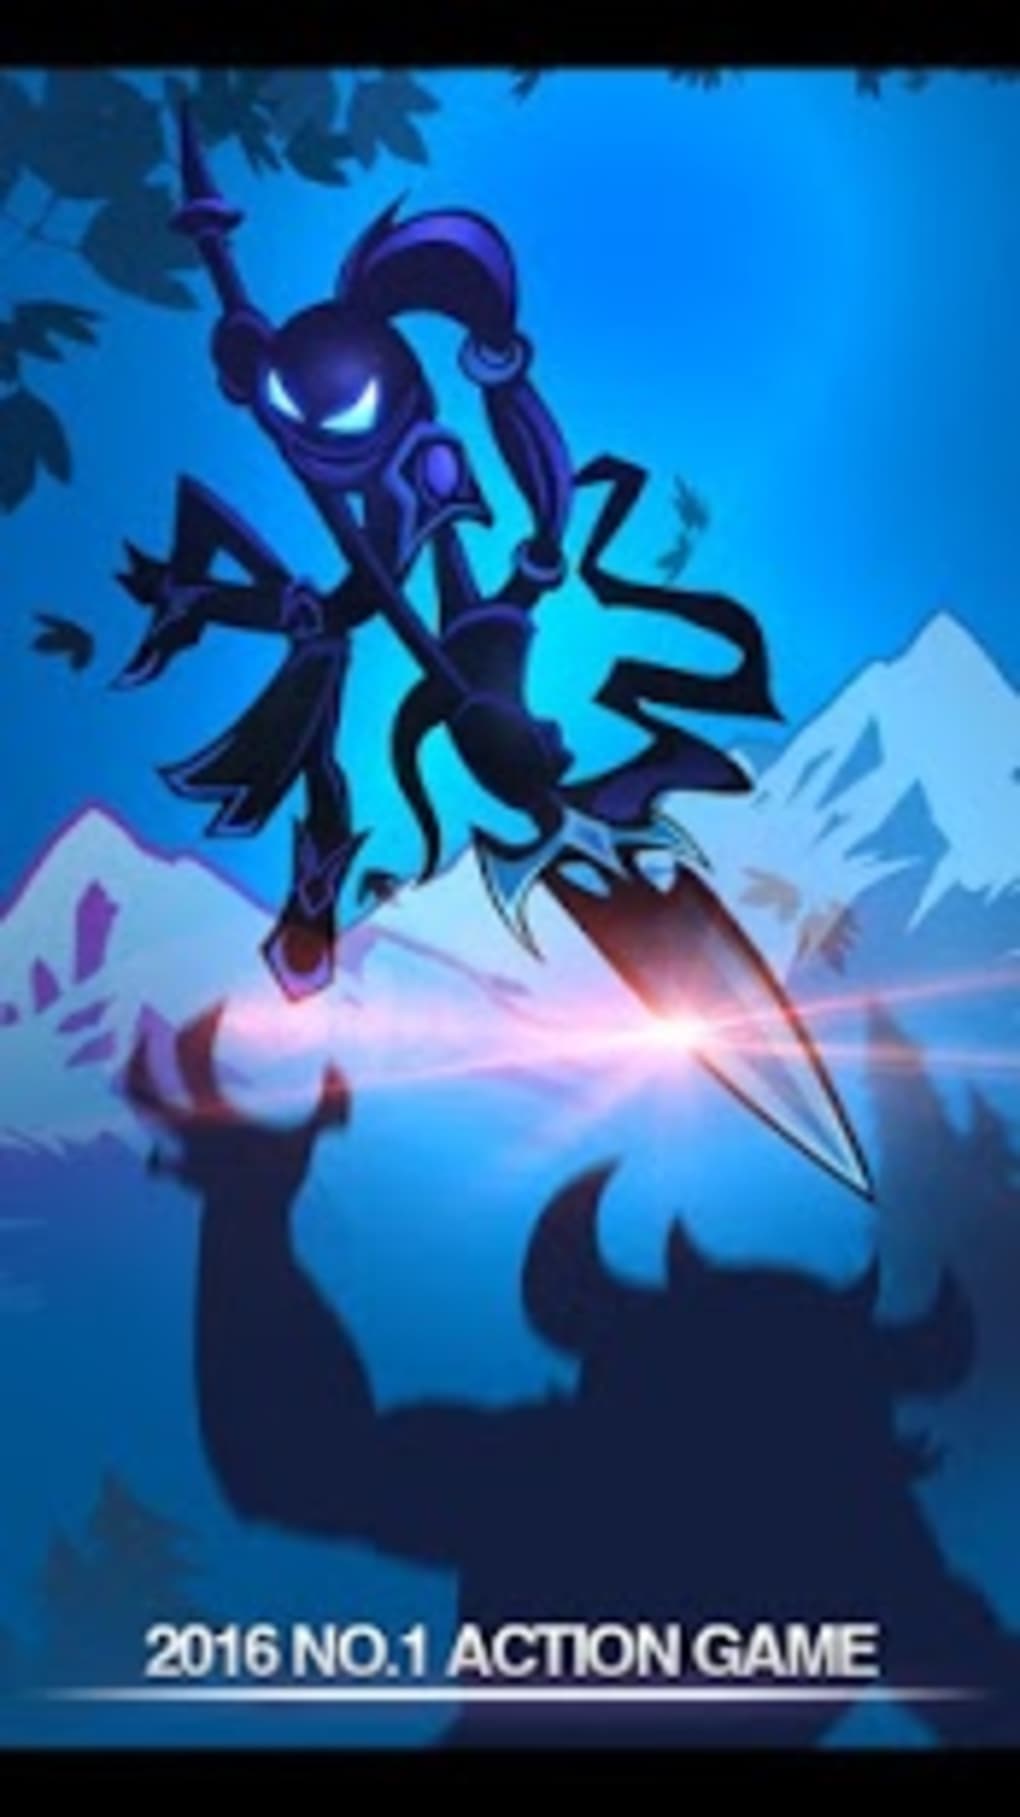 League of Stickman MOD APK 6.1.6 (Unlimited Money) for Android